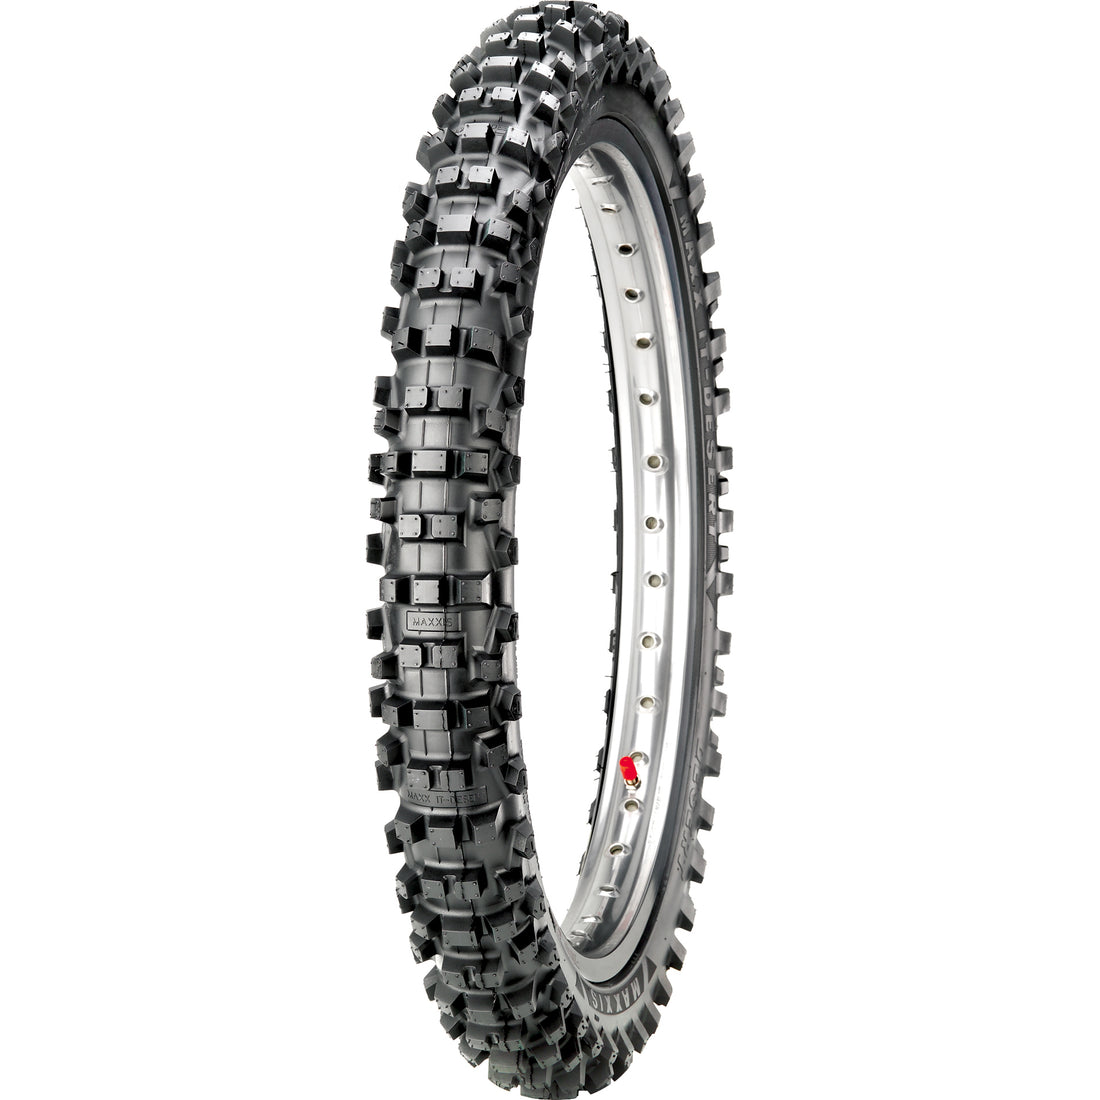 M-SC1 – Maxxis Tires - USA